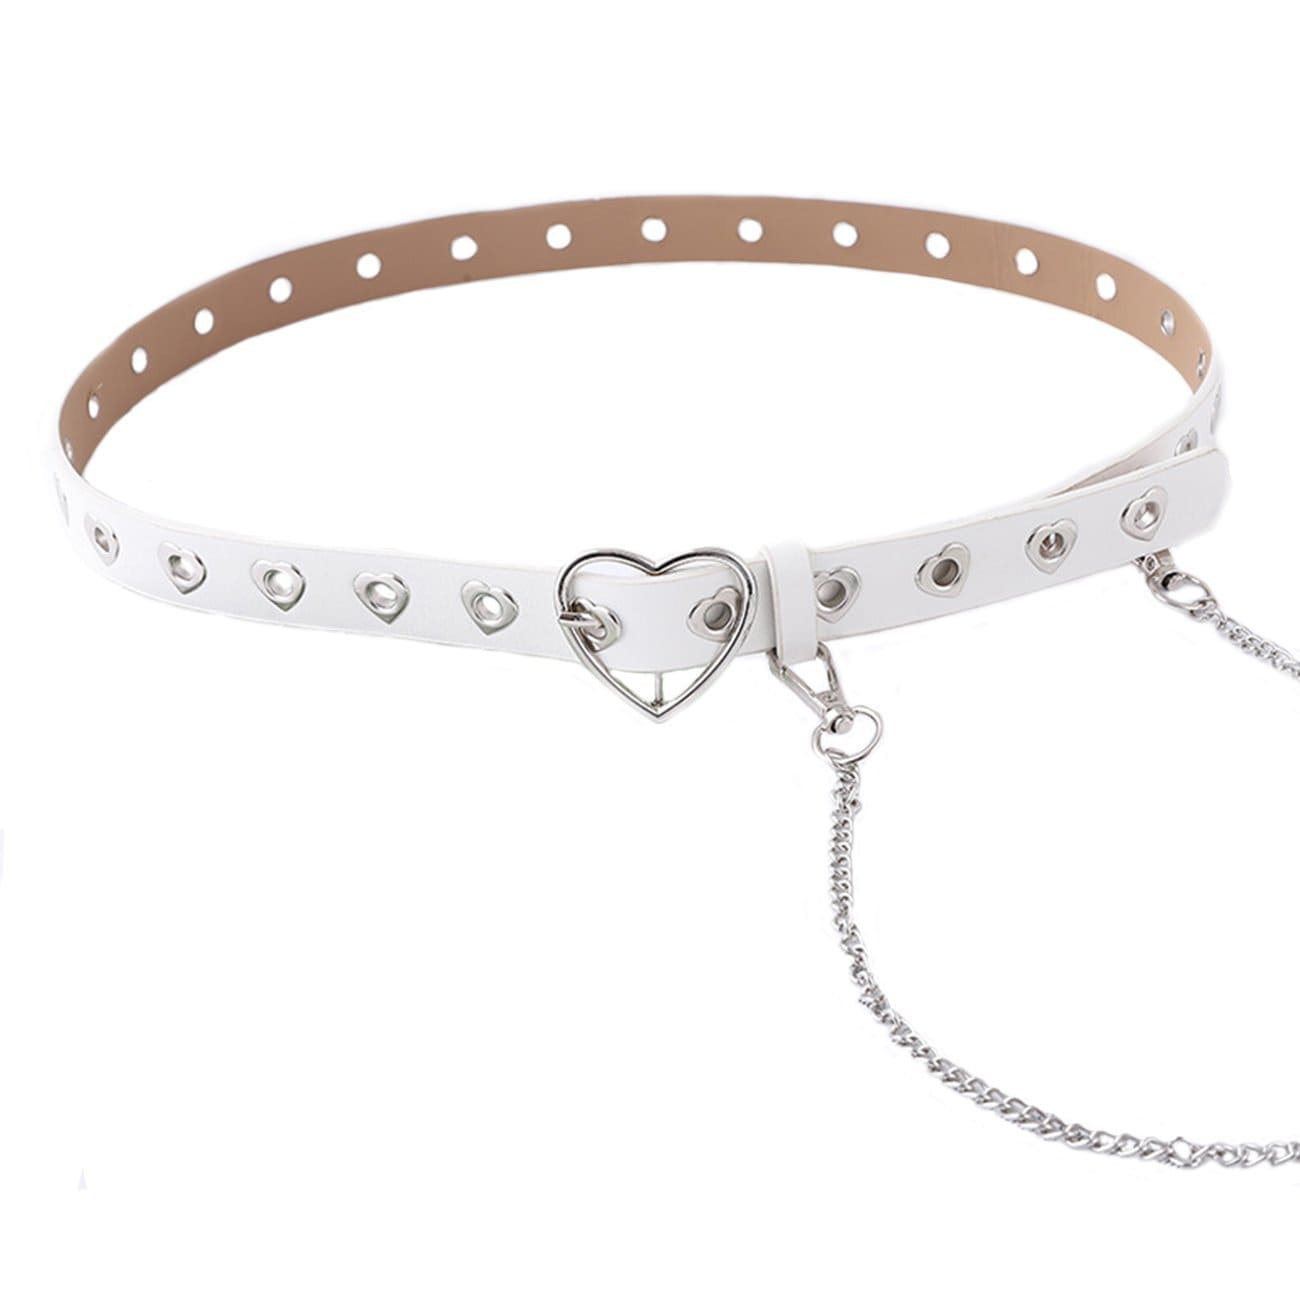 TO Punk Love Heart Hollow Out Chain Belt